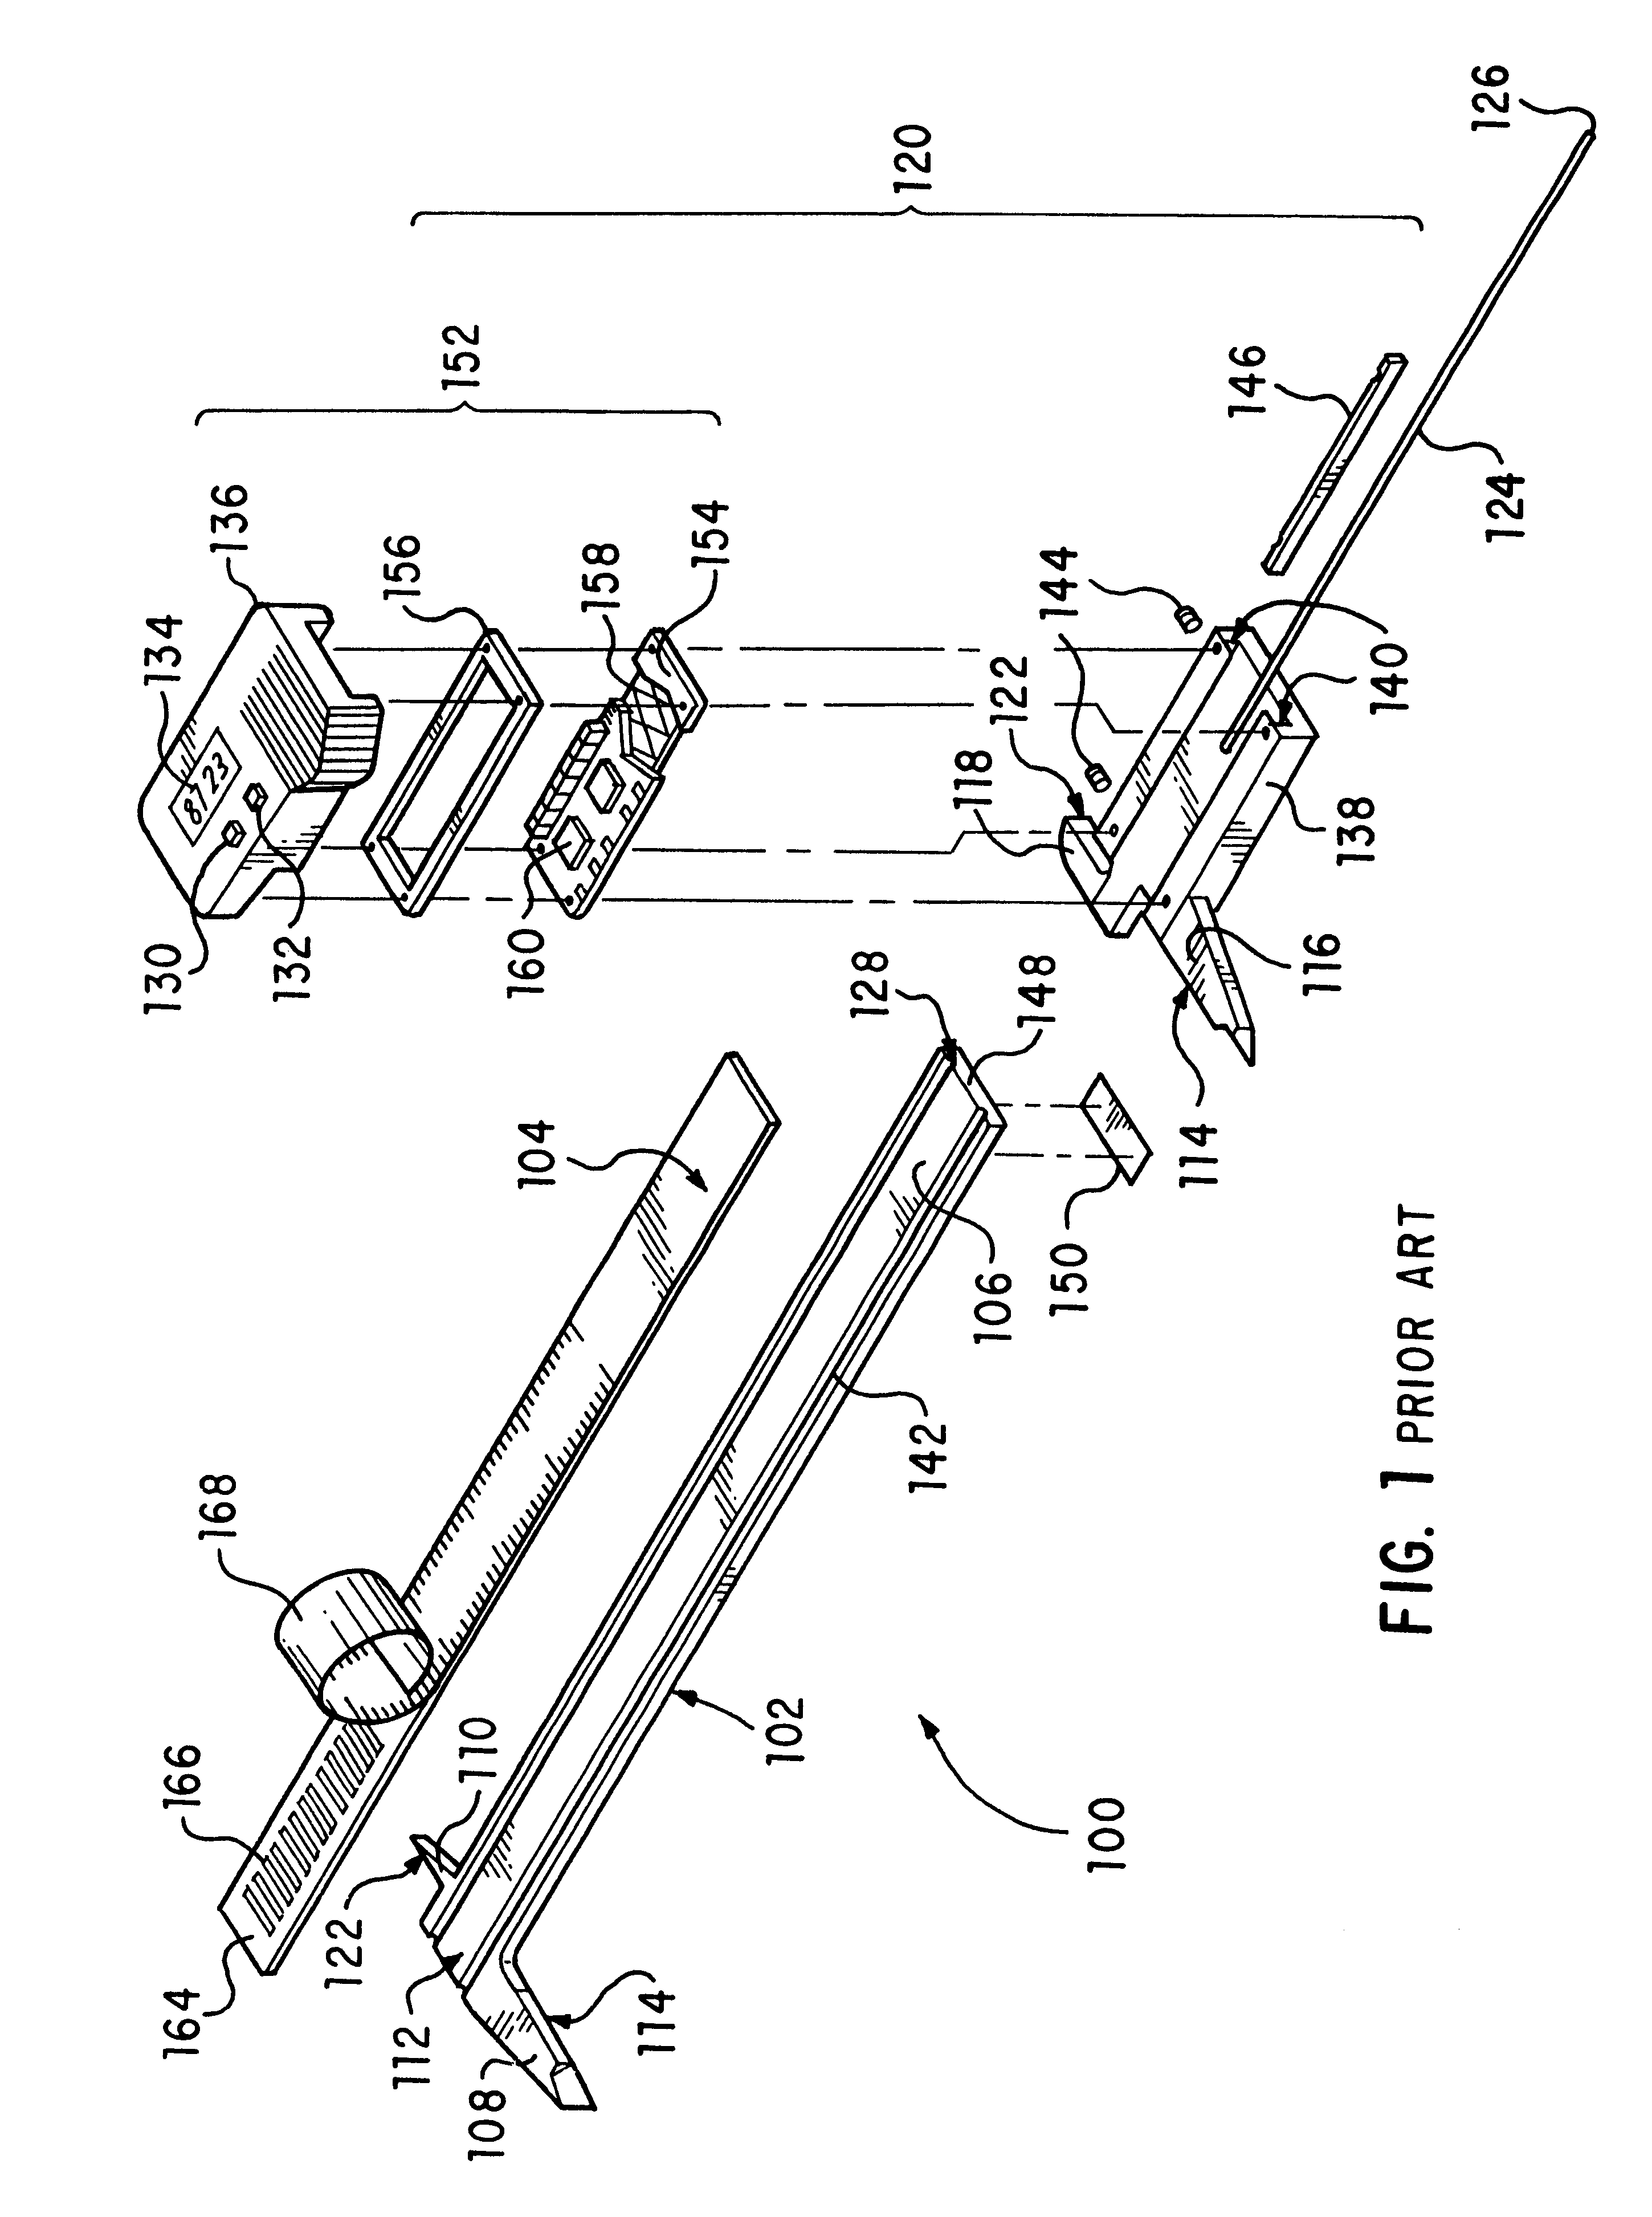 Electronic caliper using a reduced offset induced current position transducer